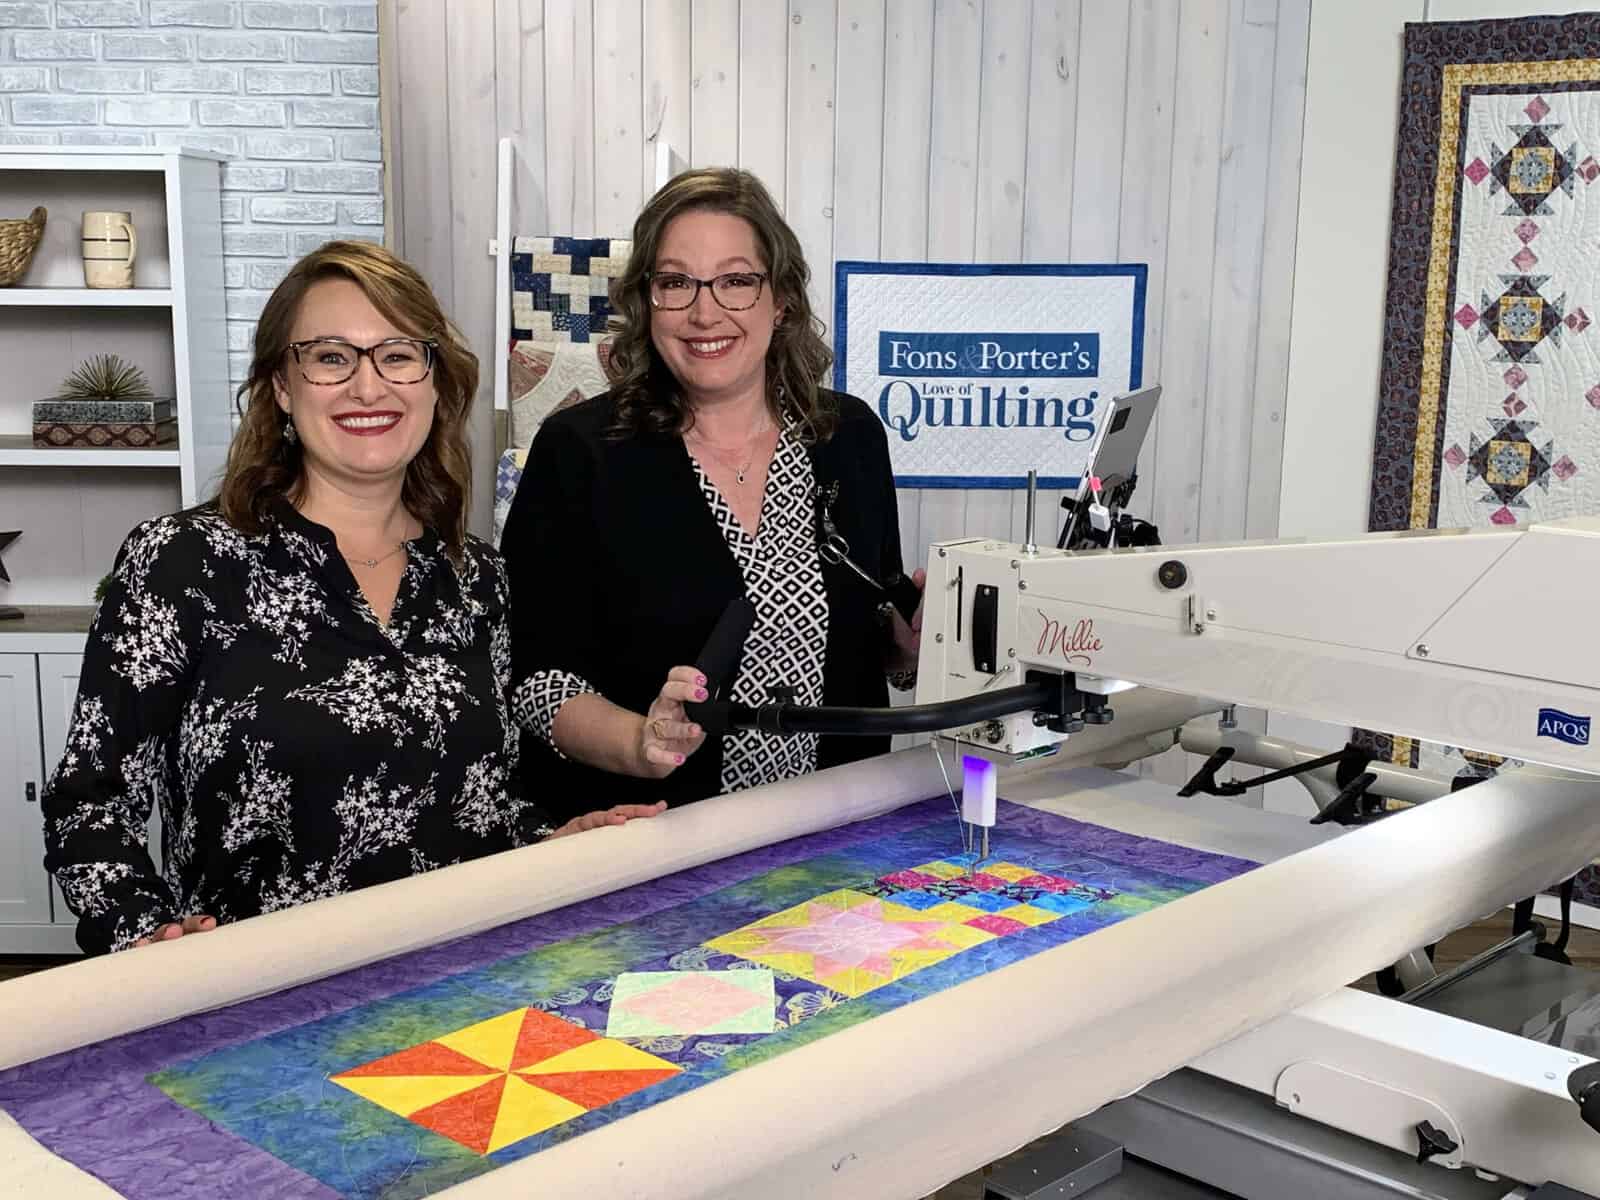 Angela and Sara with the APQS Millie on the Set of Love of Quilting 4100 Series